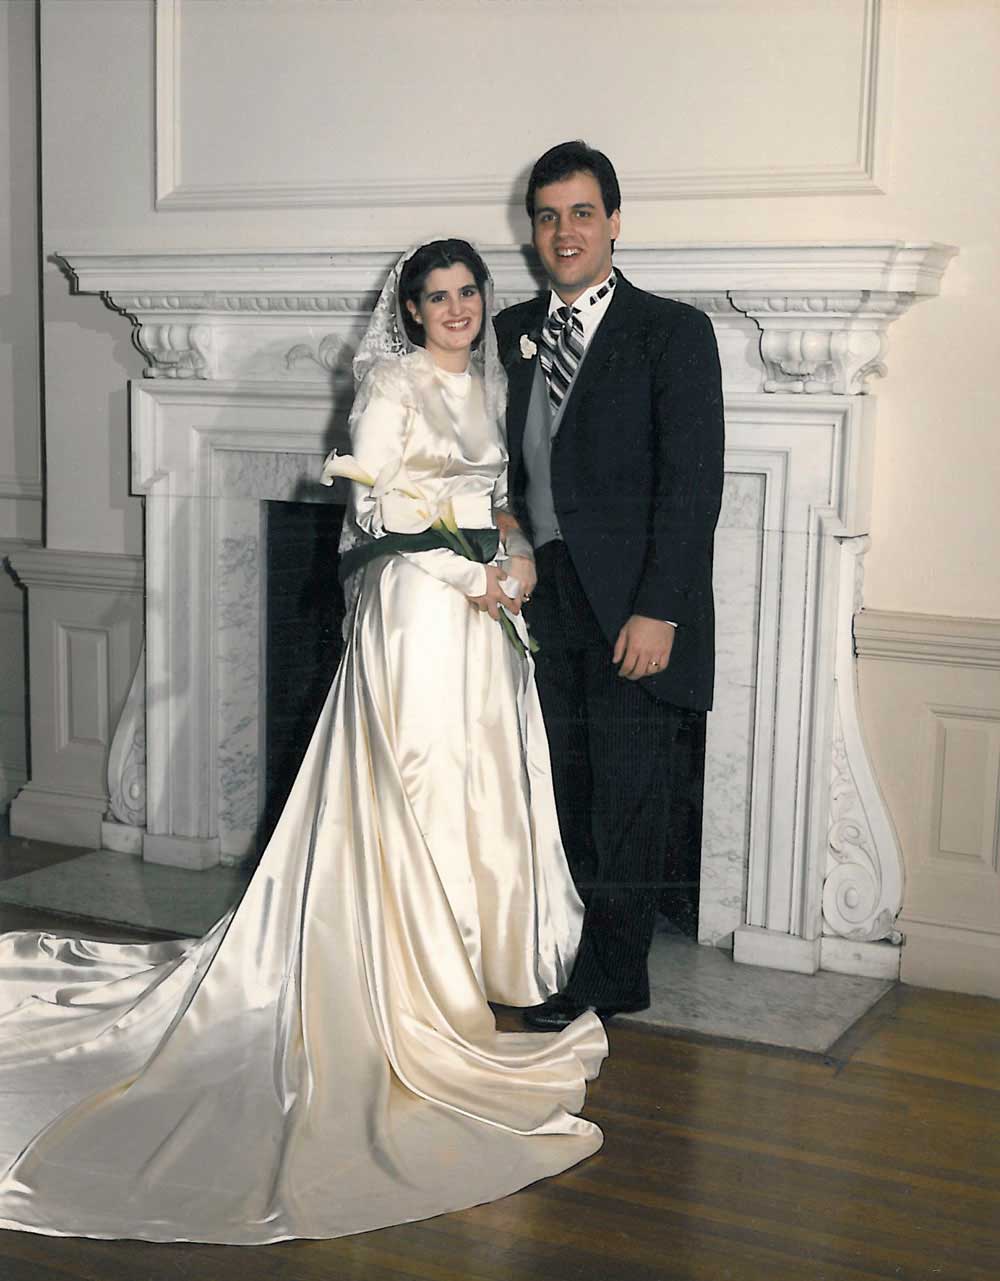 Chris Christie and Mary Pat on their wedding day in 1986.